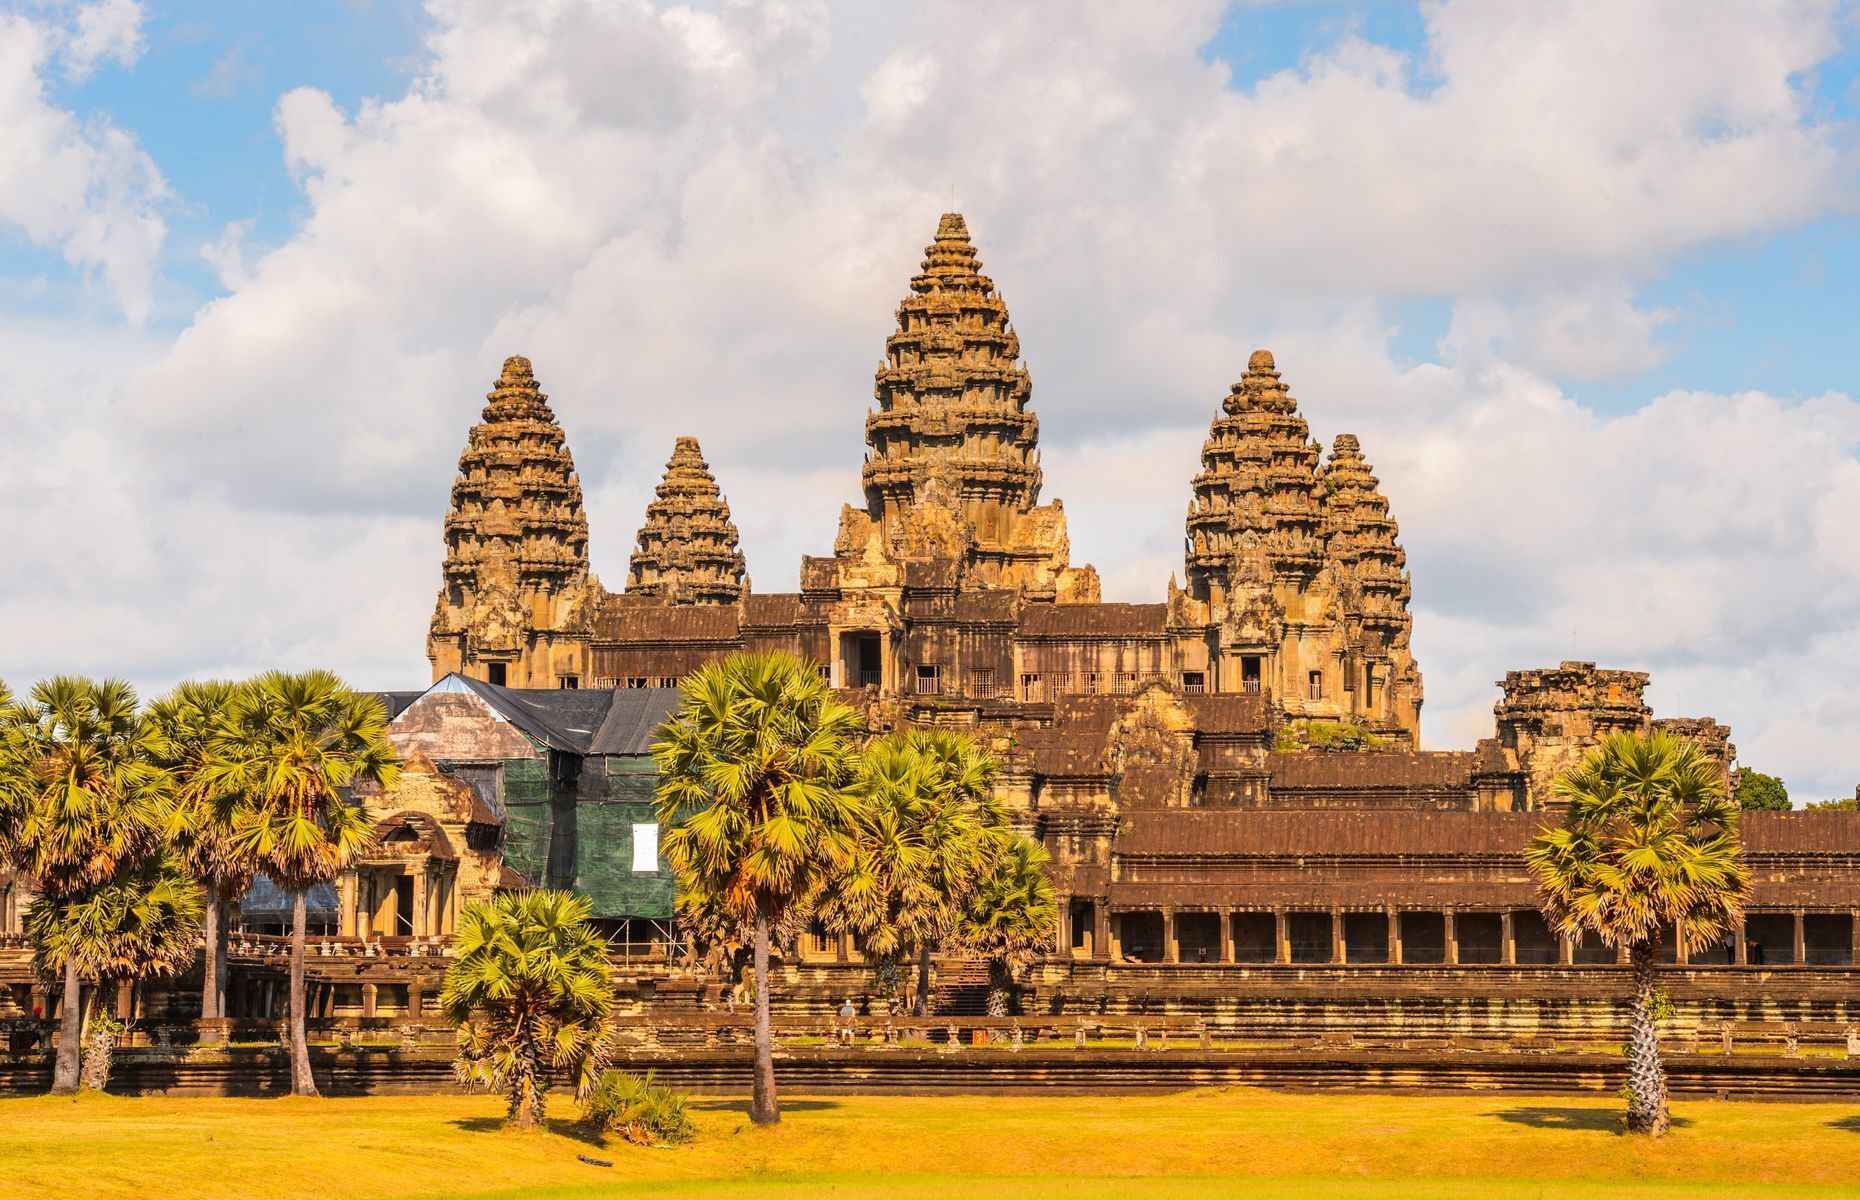 <p>Dating from the 12th century, the temple of Angkor Wat is the <a href="https://www.britannica.com/topic/Angkor-Wat" rel="noreferrer noopener">largest religious monument in the world</a>. Originally built in honour of the Hindu god Vishnu, it’s now maintained by Buddhist monks and has come to symbolize the Khmer nation. Characteristic bas-reliefs and lotus bud towers have made Angkor Wat a major cultural attraction in Asia. Indeed, <a href="https://www.phnompenhpost.com/business/angkor-hosts-26m-visitors" rel="noreferrer noopener">2.6 million foreign tourists</a> visited the site in 2018.</p>